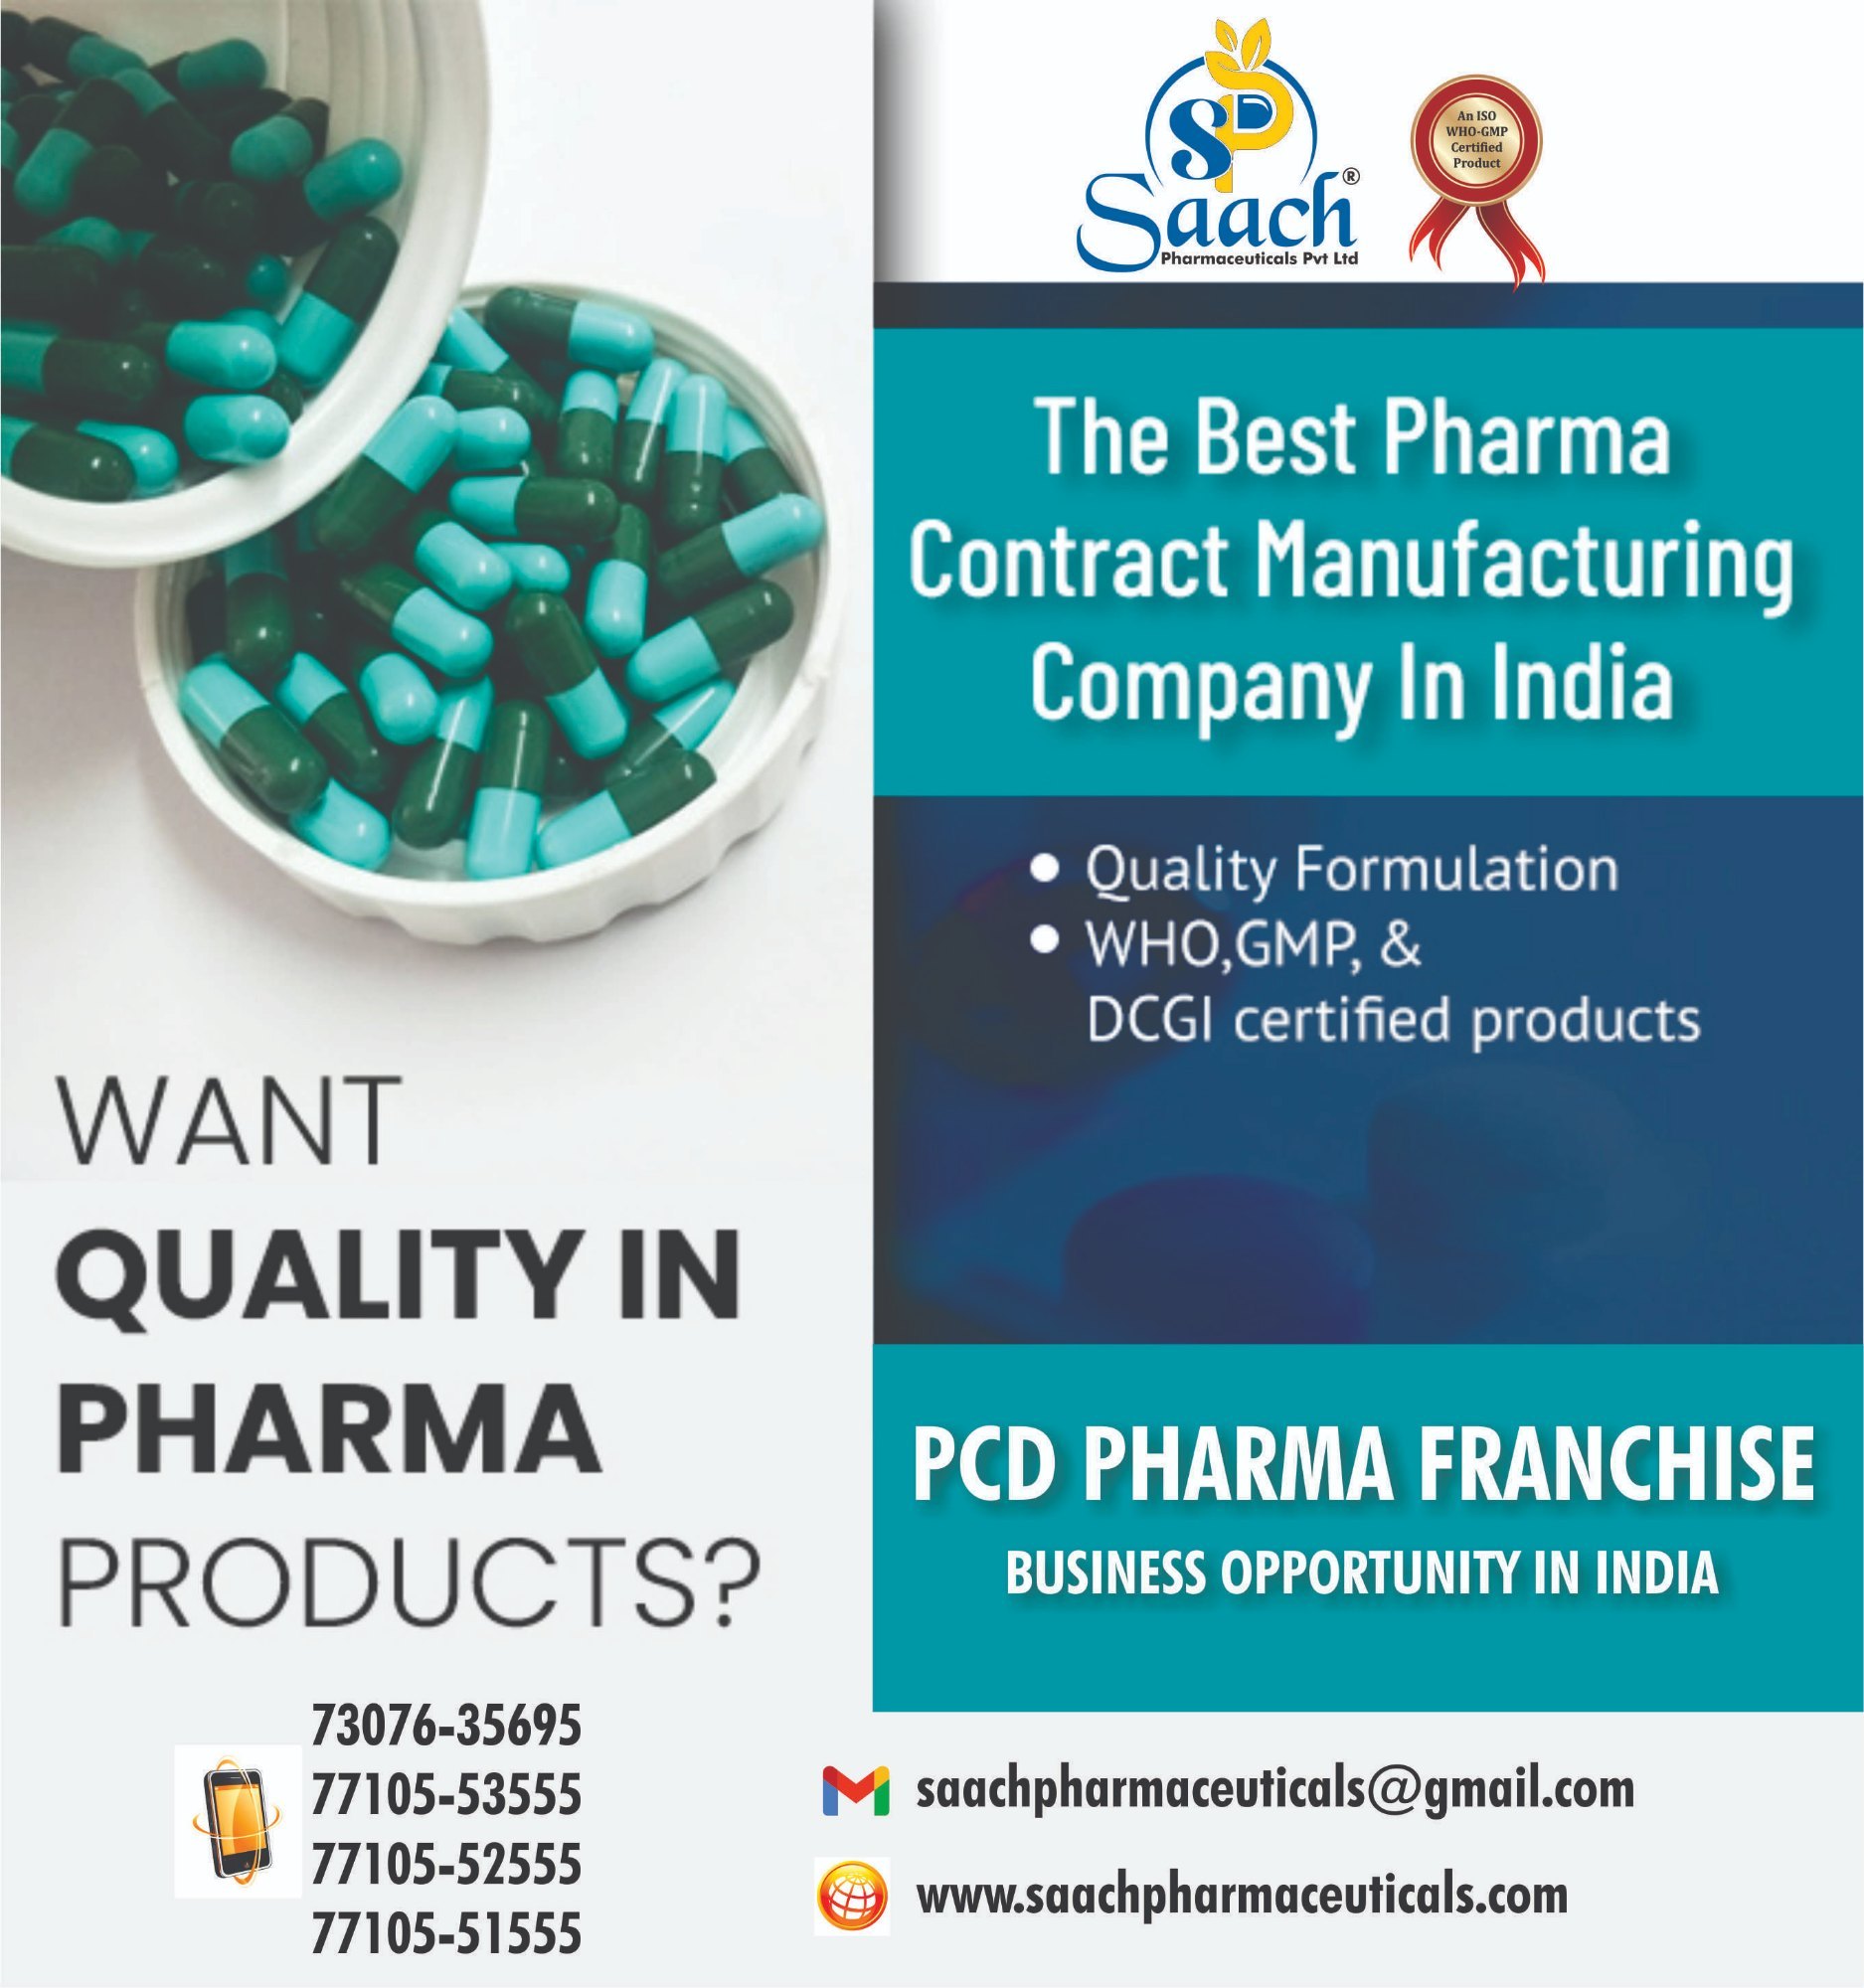 Saach Pharmaceuticals Private Limited